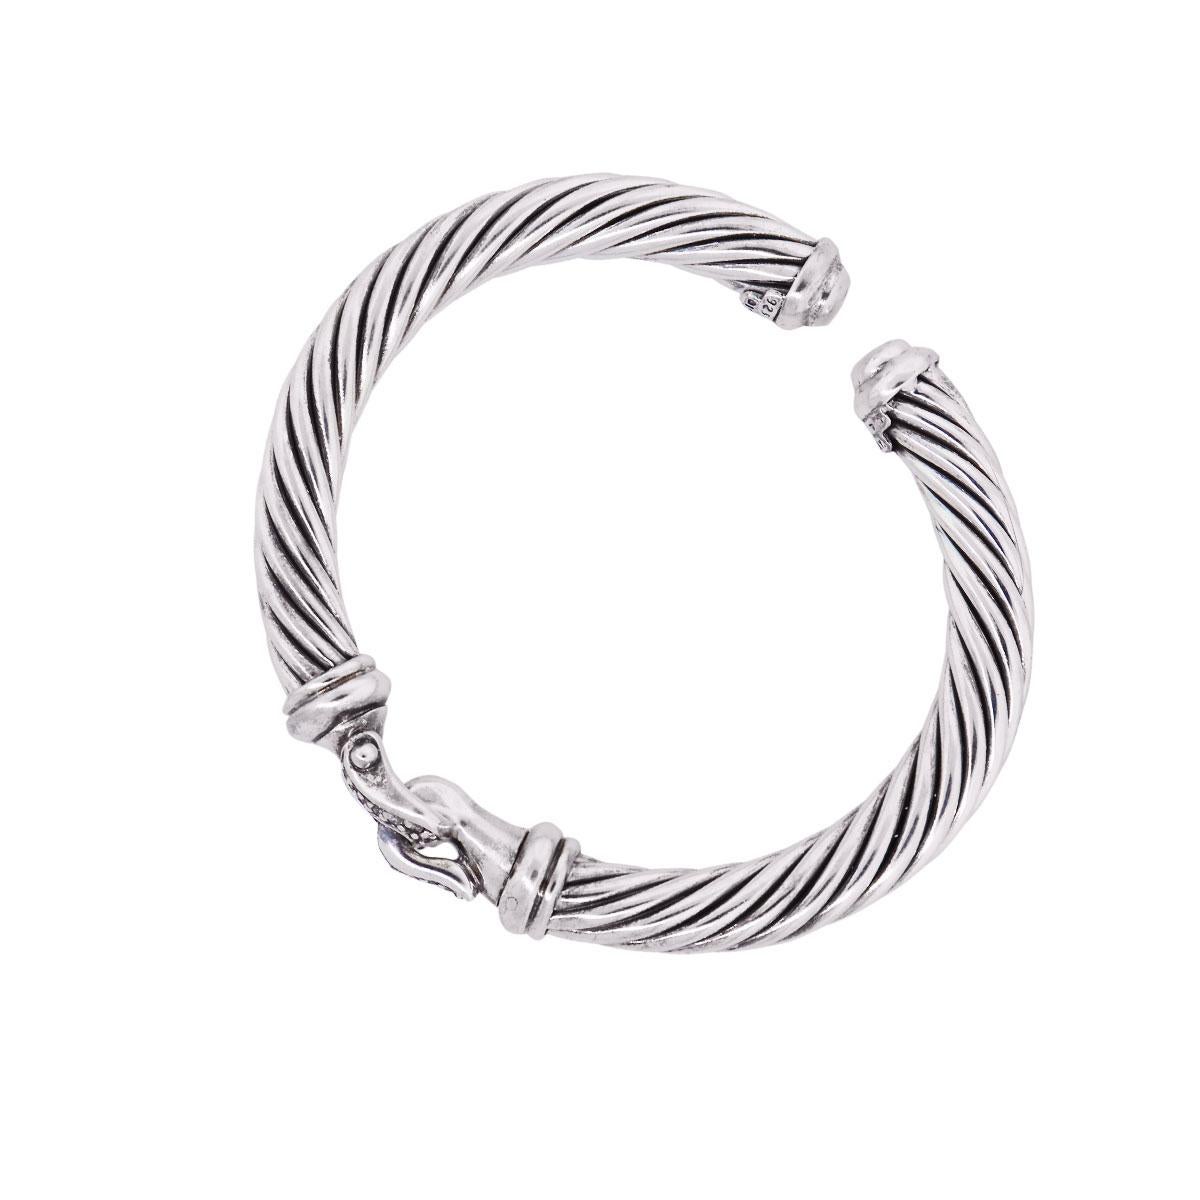 Designer: David Yurman
Material: Sterling silver
Diamond Details: Approximately 0.20ctw of round brilliant diamonds. Diamonds are G/H in color and VS in clarity
Total Weight: 43g (27.6dwt)
Bracelet Measurements: Will fit a 6″ wrist
Clasp Details: